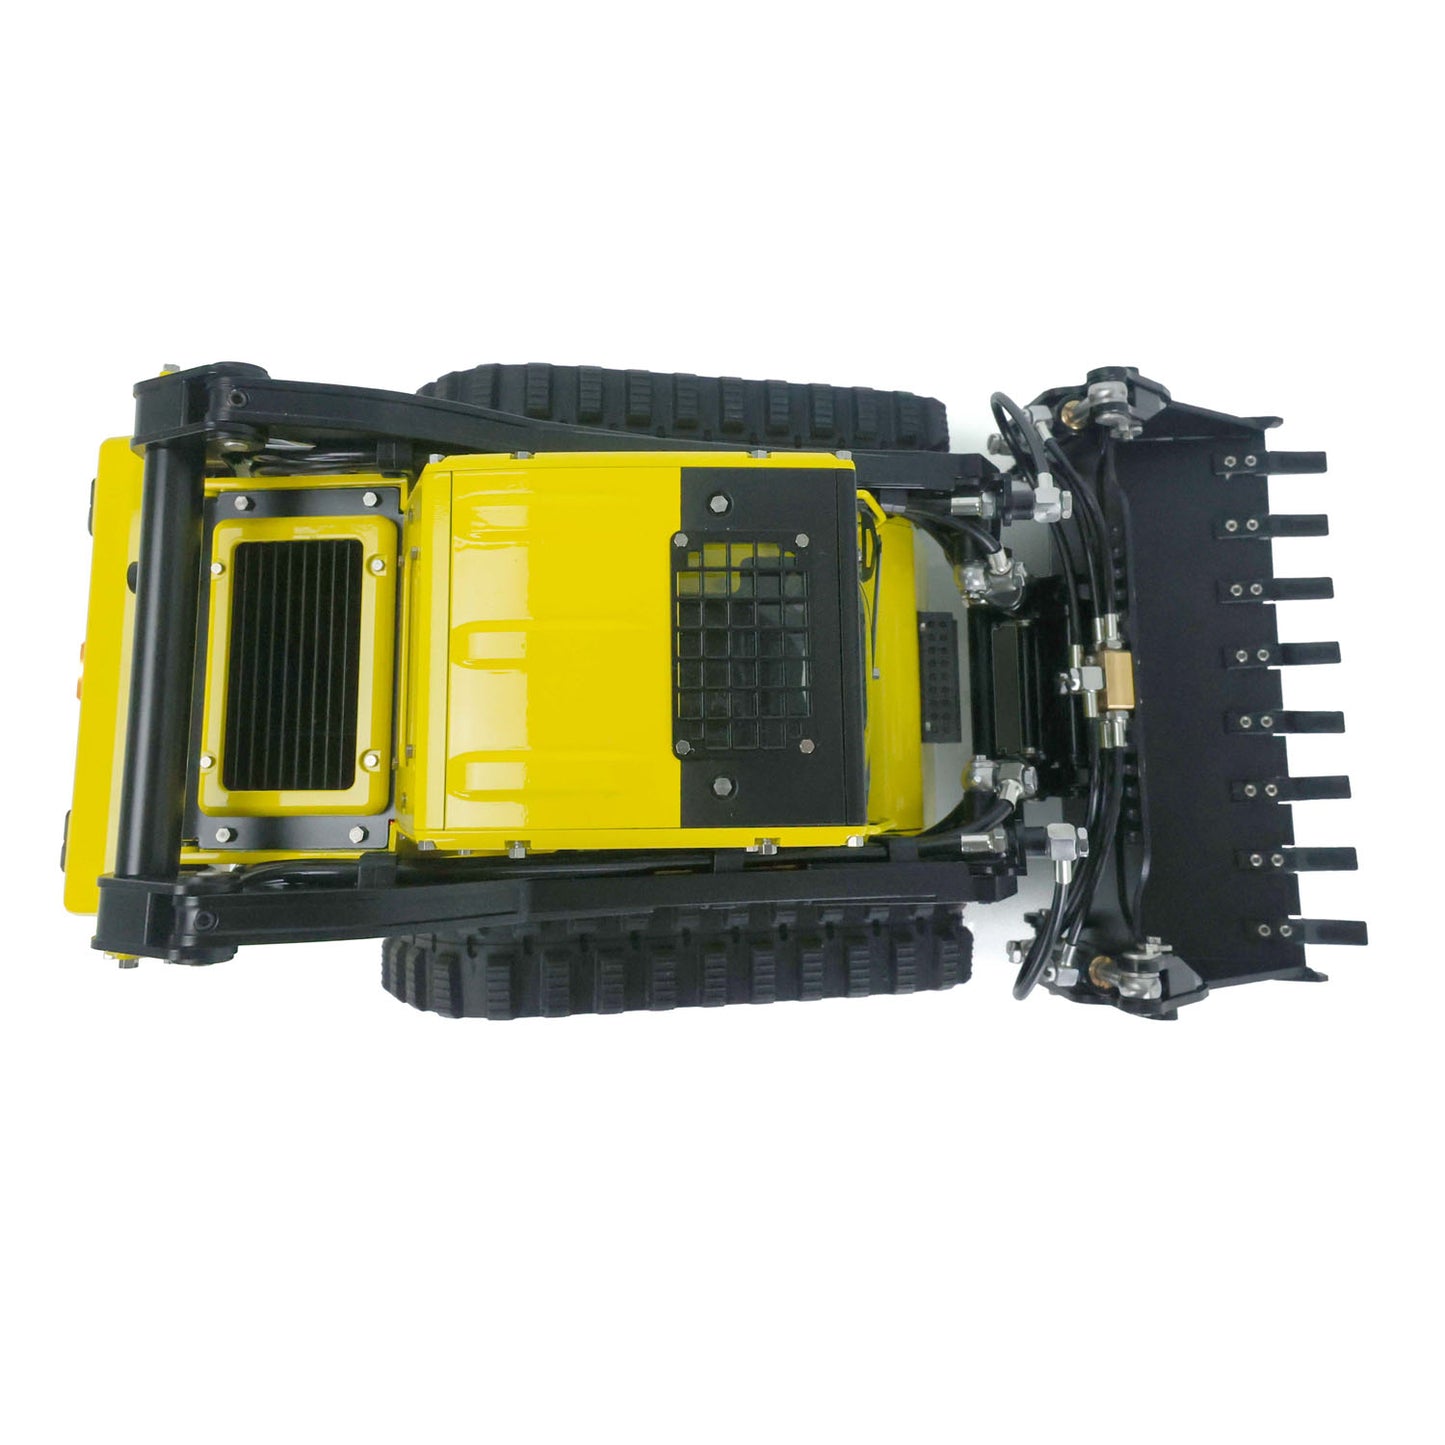 LESU 1/14 Scale Metal Assembled Aoue LT5 Skid-Steer Loader Radio Control Tracked Dozer Blade Openable Bucket Gripper Hay Clamp